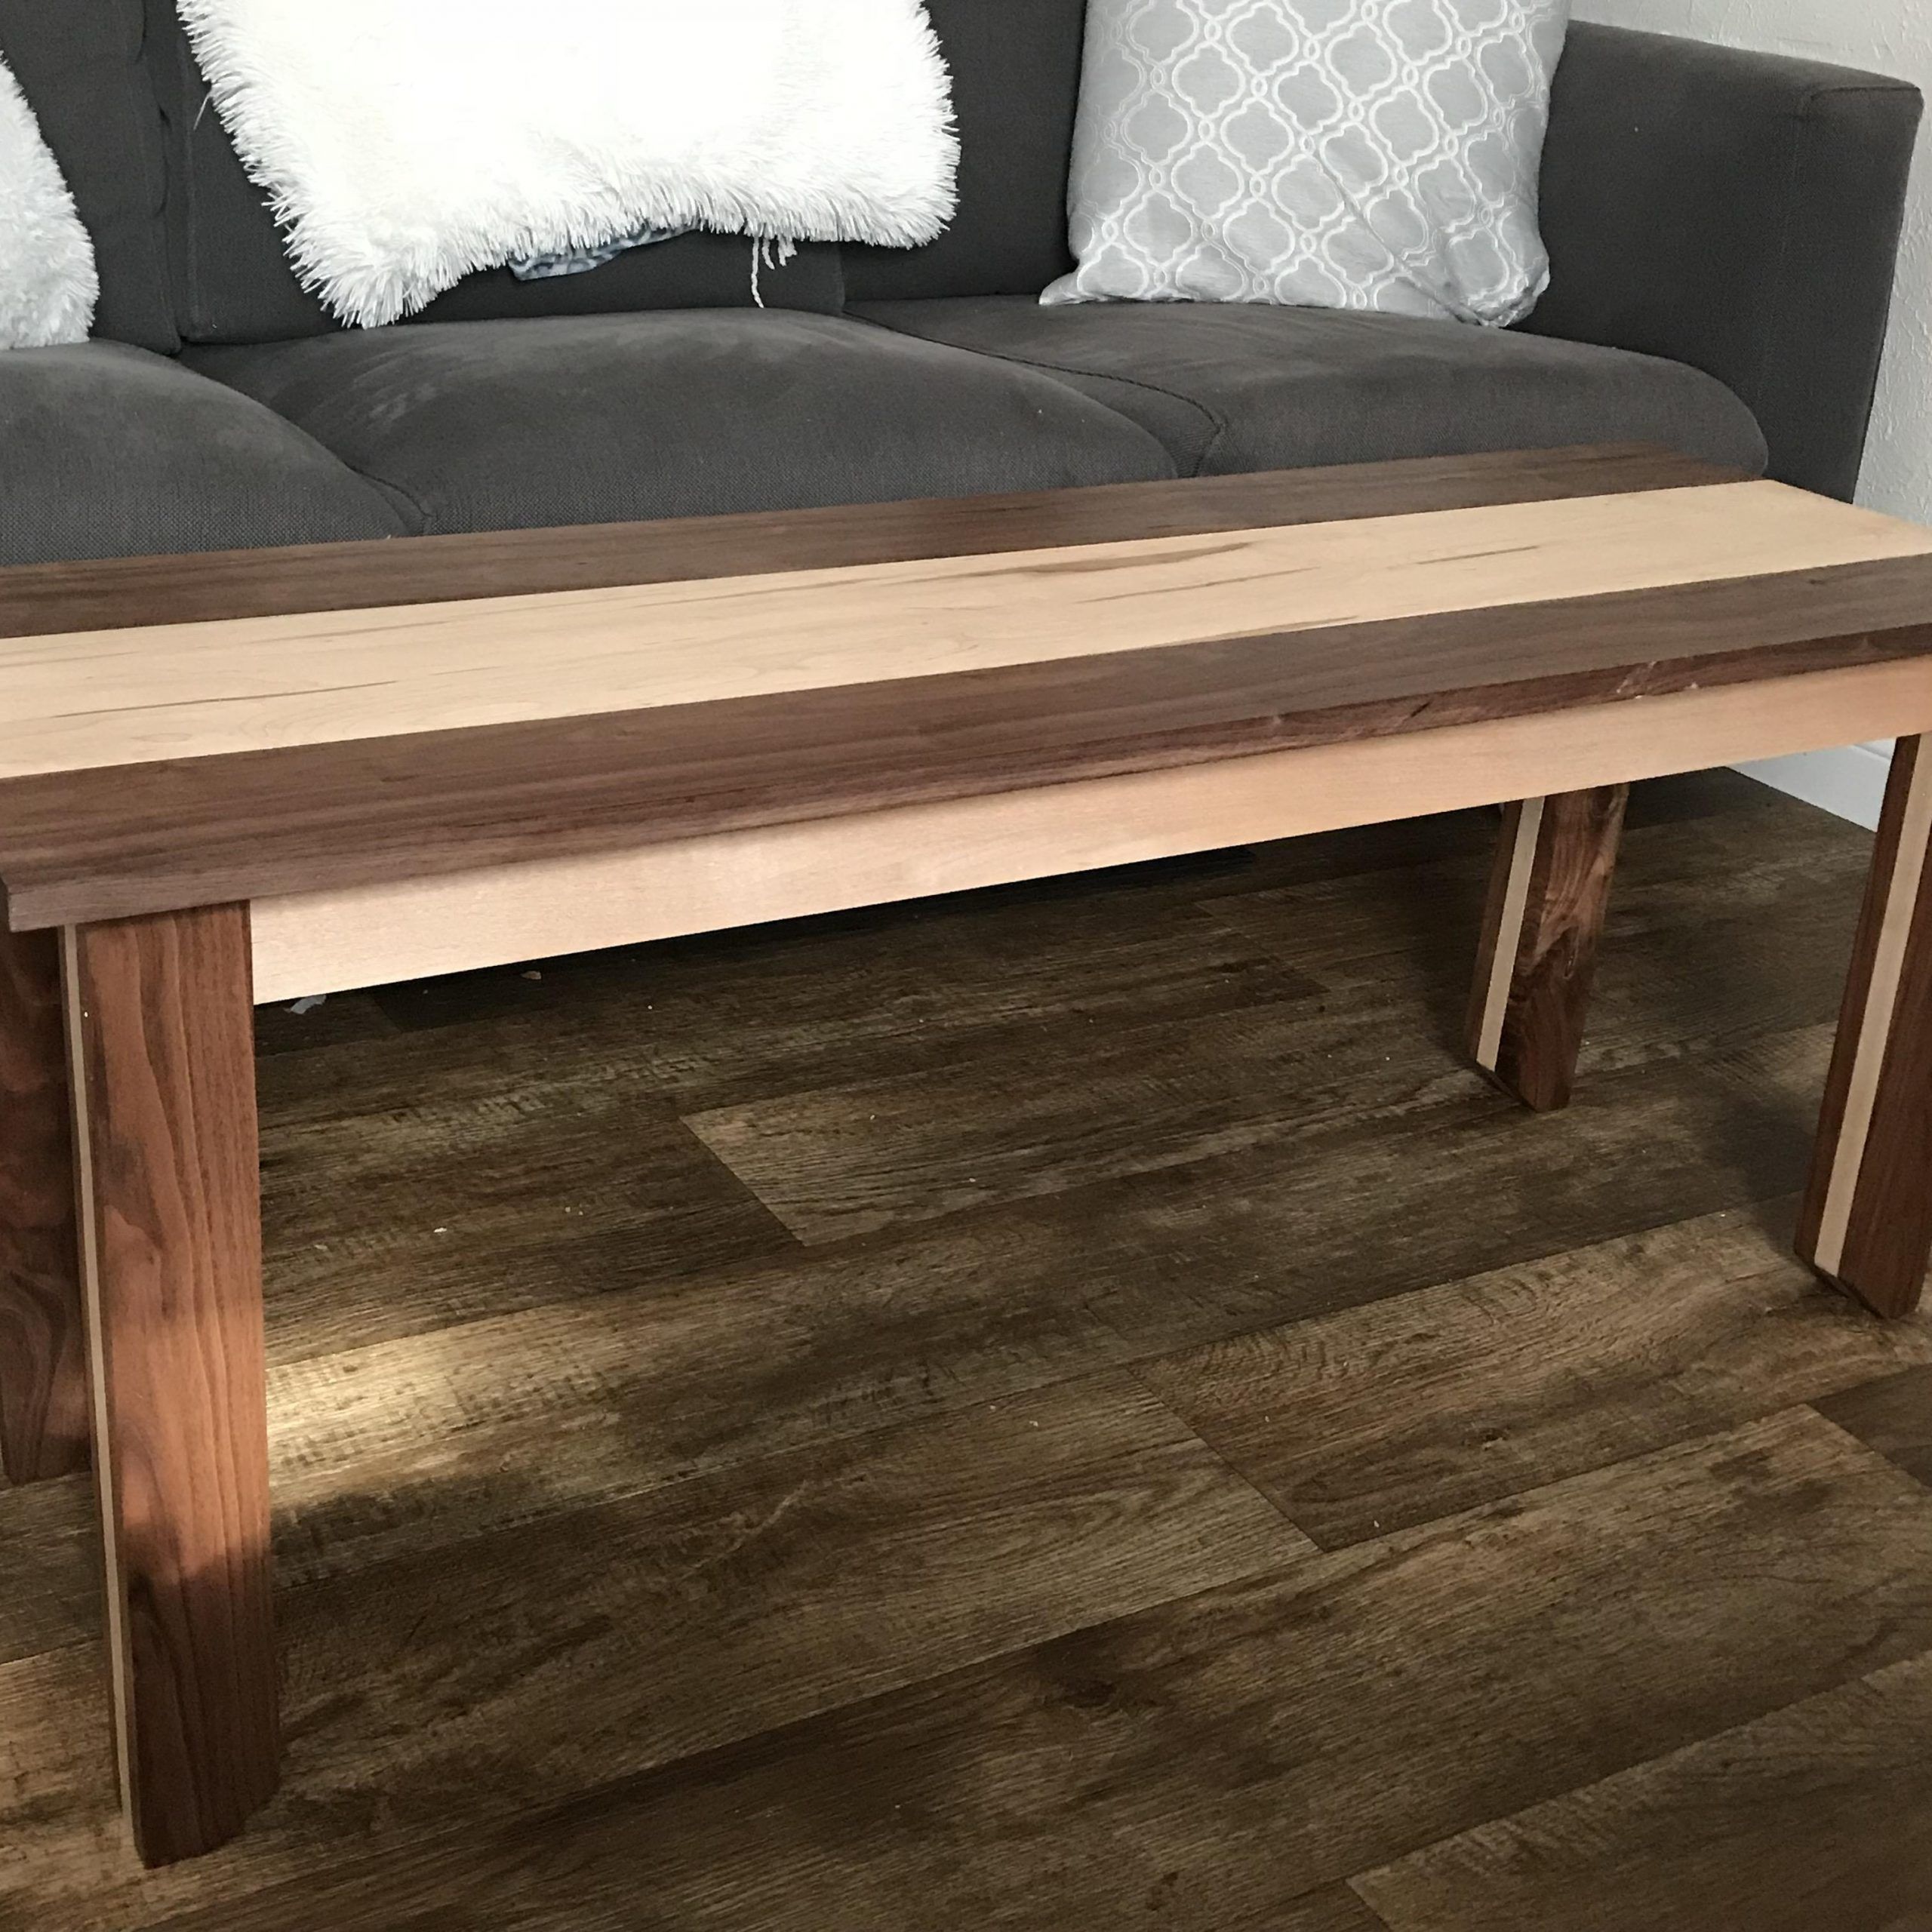 Favorite Hand Finished Walnut Coffee Tables Regarding Walnut And Maple Coffee Table I Just Finished Up : Woodworking (Gallery 16 of 20)